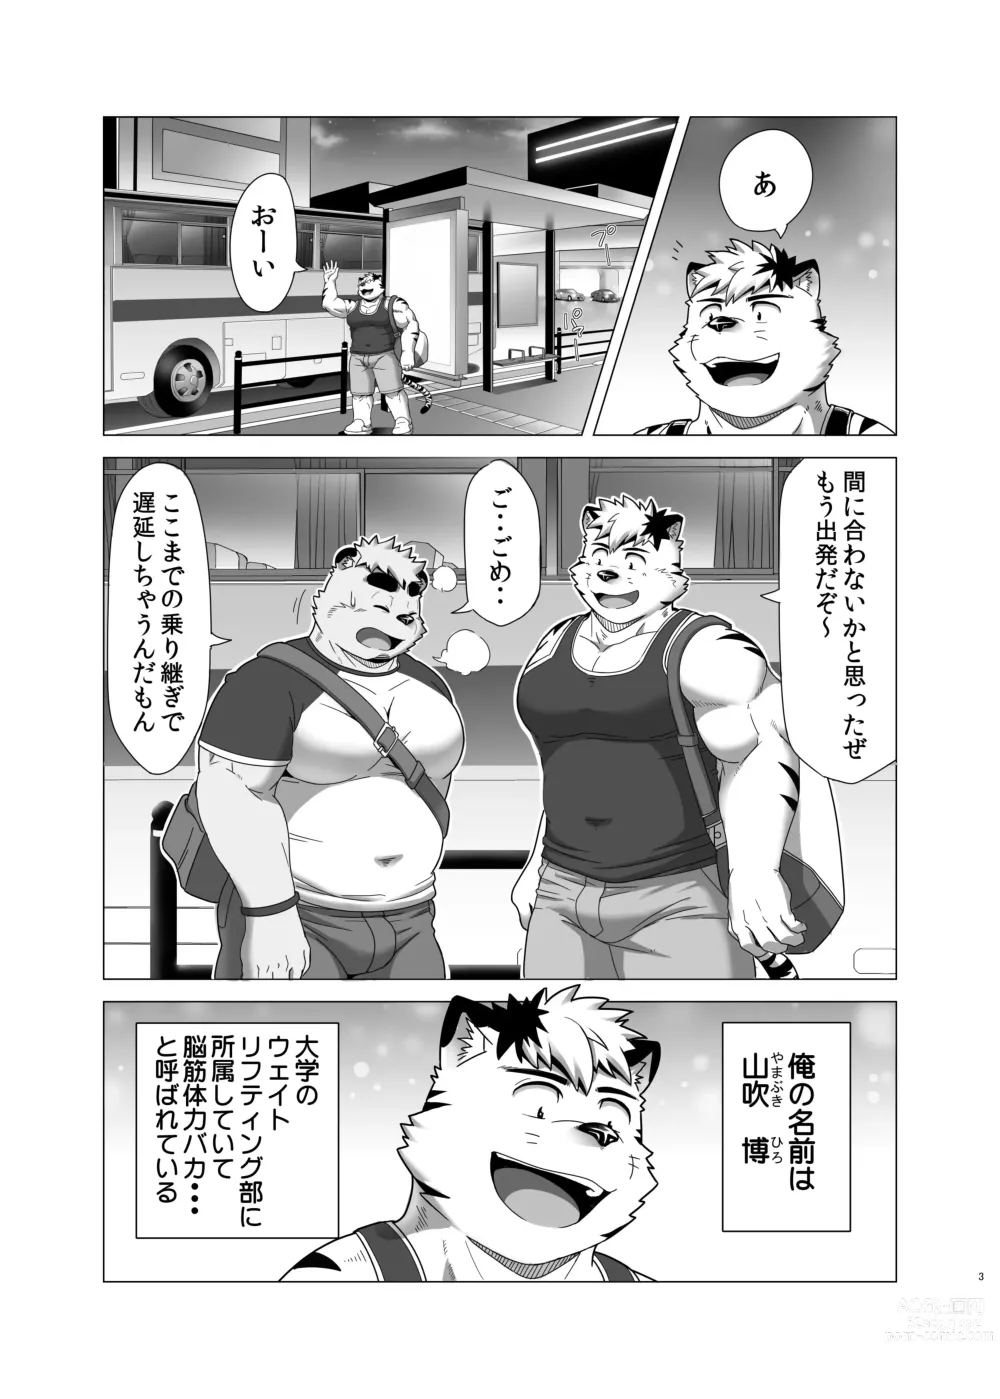 Page 2 of doujinshi MIDNIGHT APPROACH